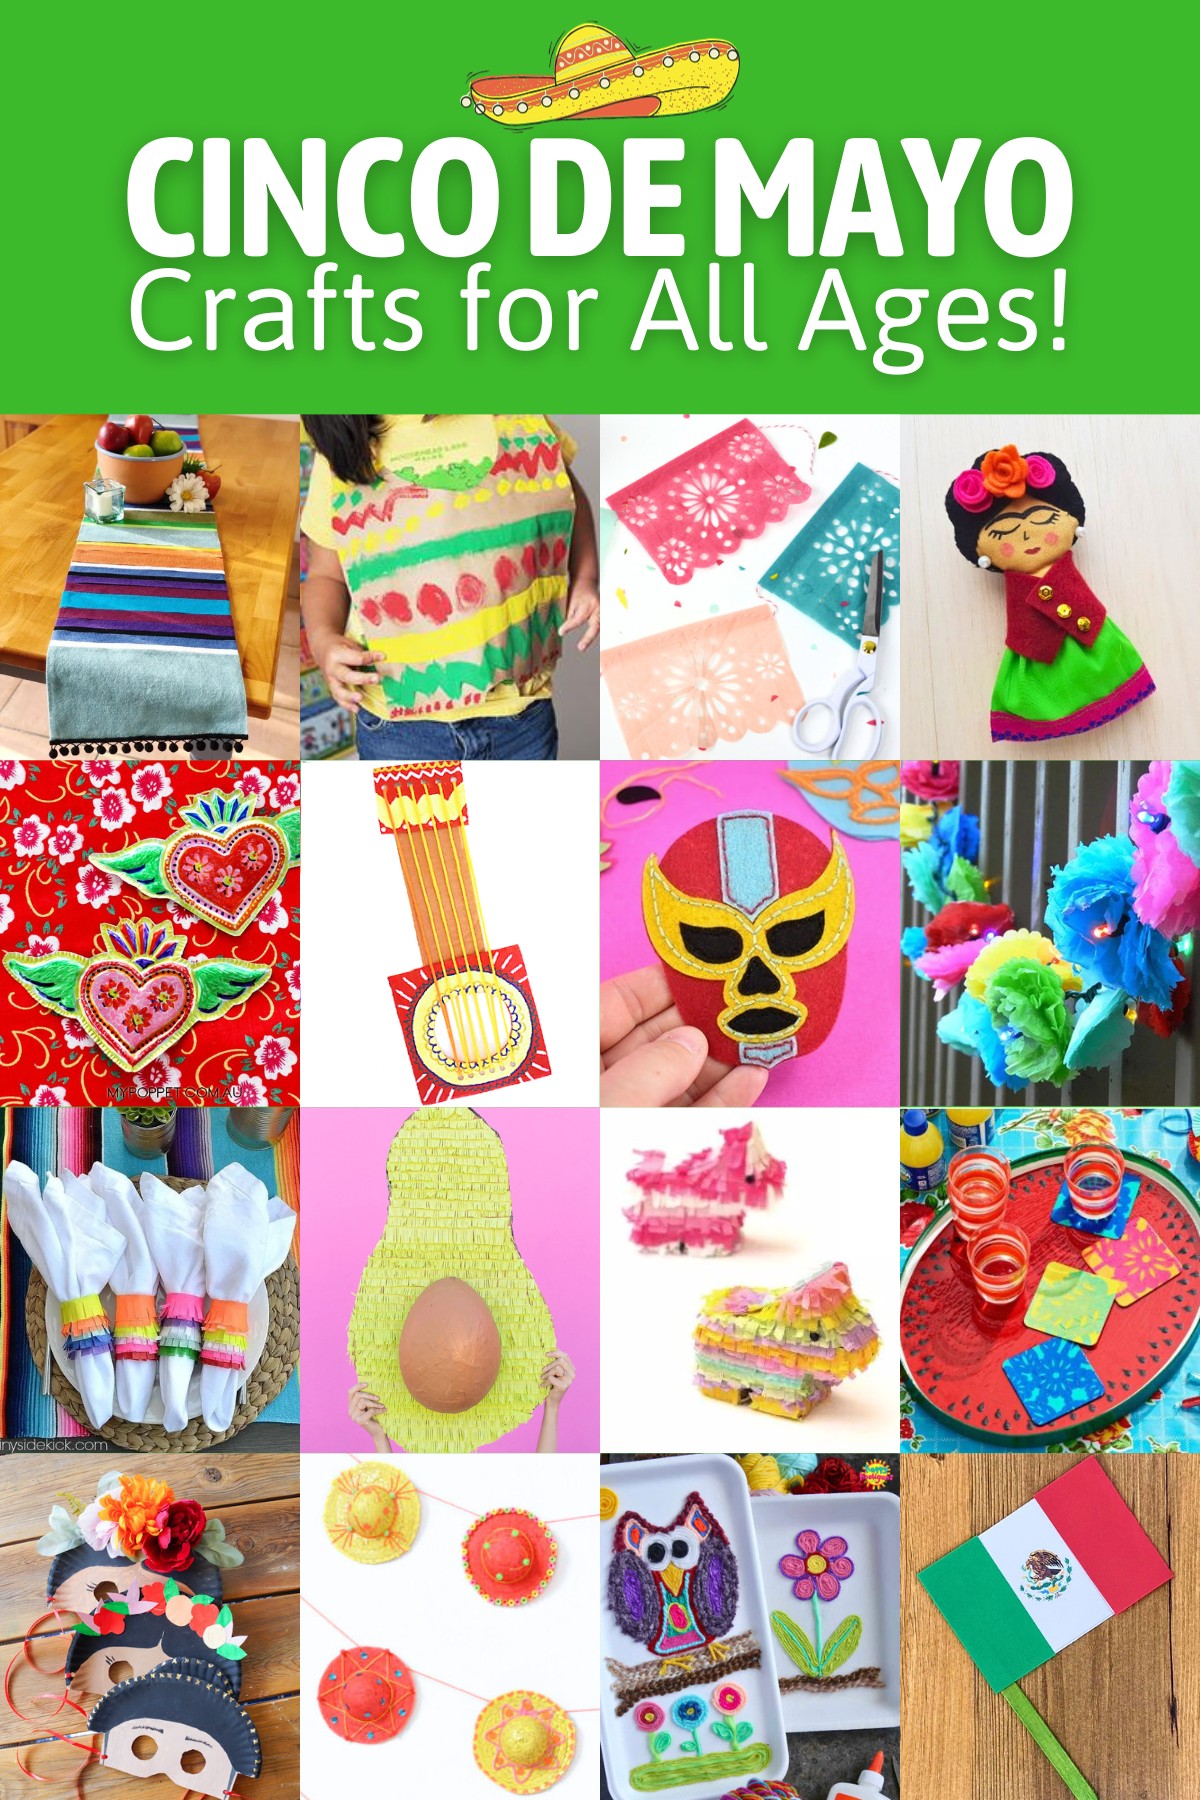 Cinco de Mayo Crafts: A Fiesta for All Ages! - Mod Podge Rocks